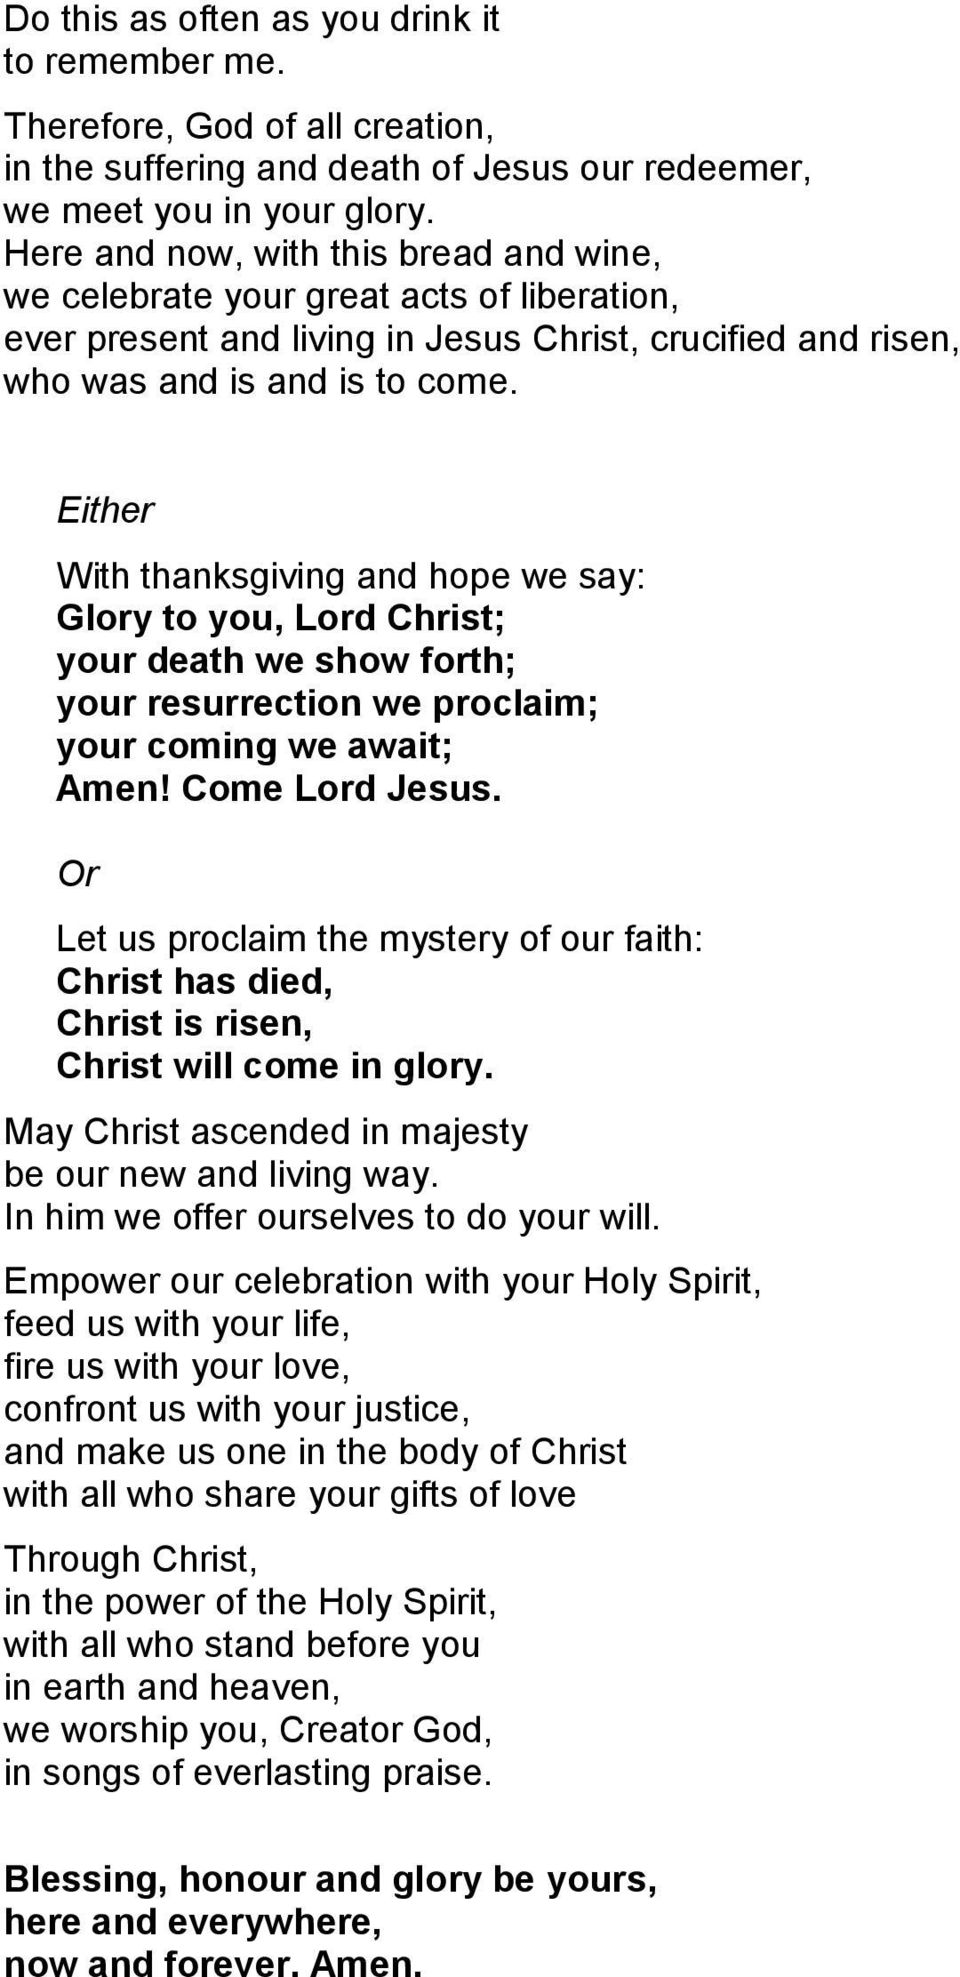 Either With thanksgiving and hope we say: Glory to you, Lord Christ; your death we show forth; your resurrection we proclaim; your coming we await; Amen! Come Lord Jesus.